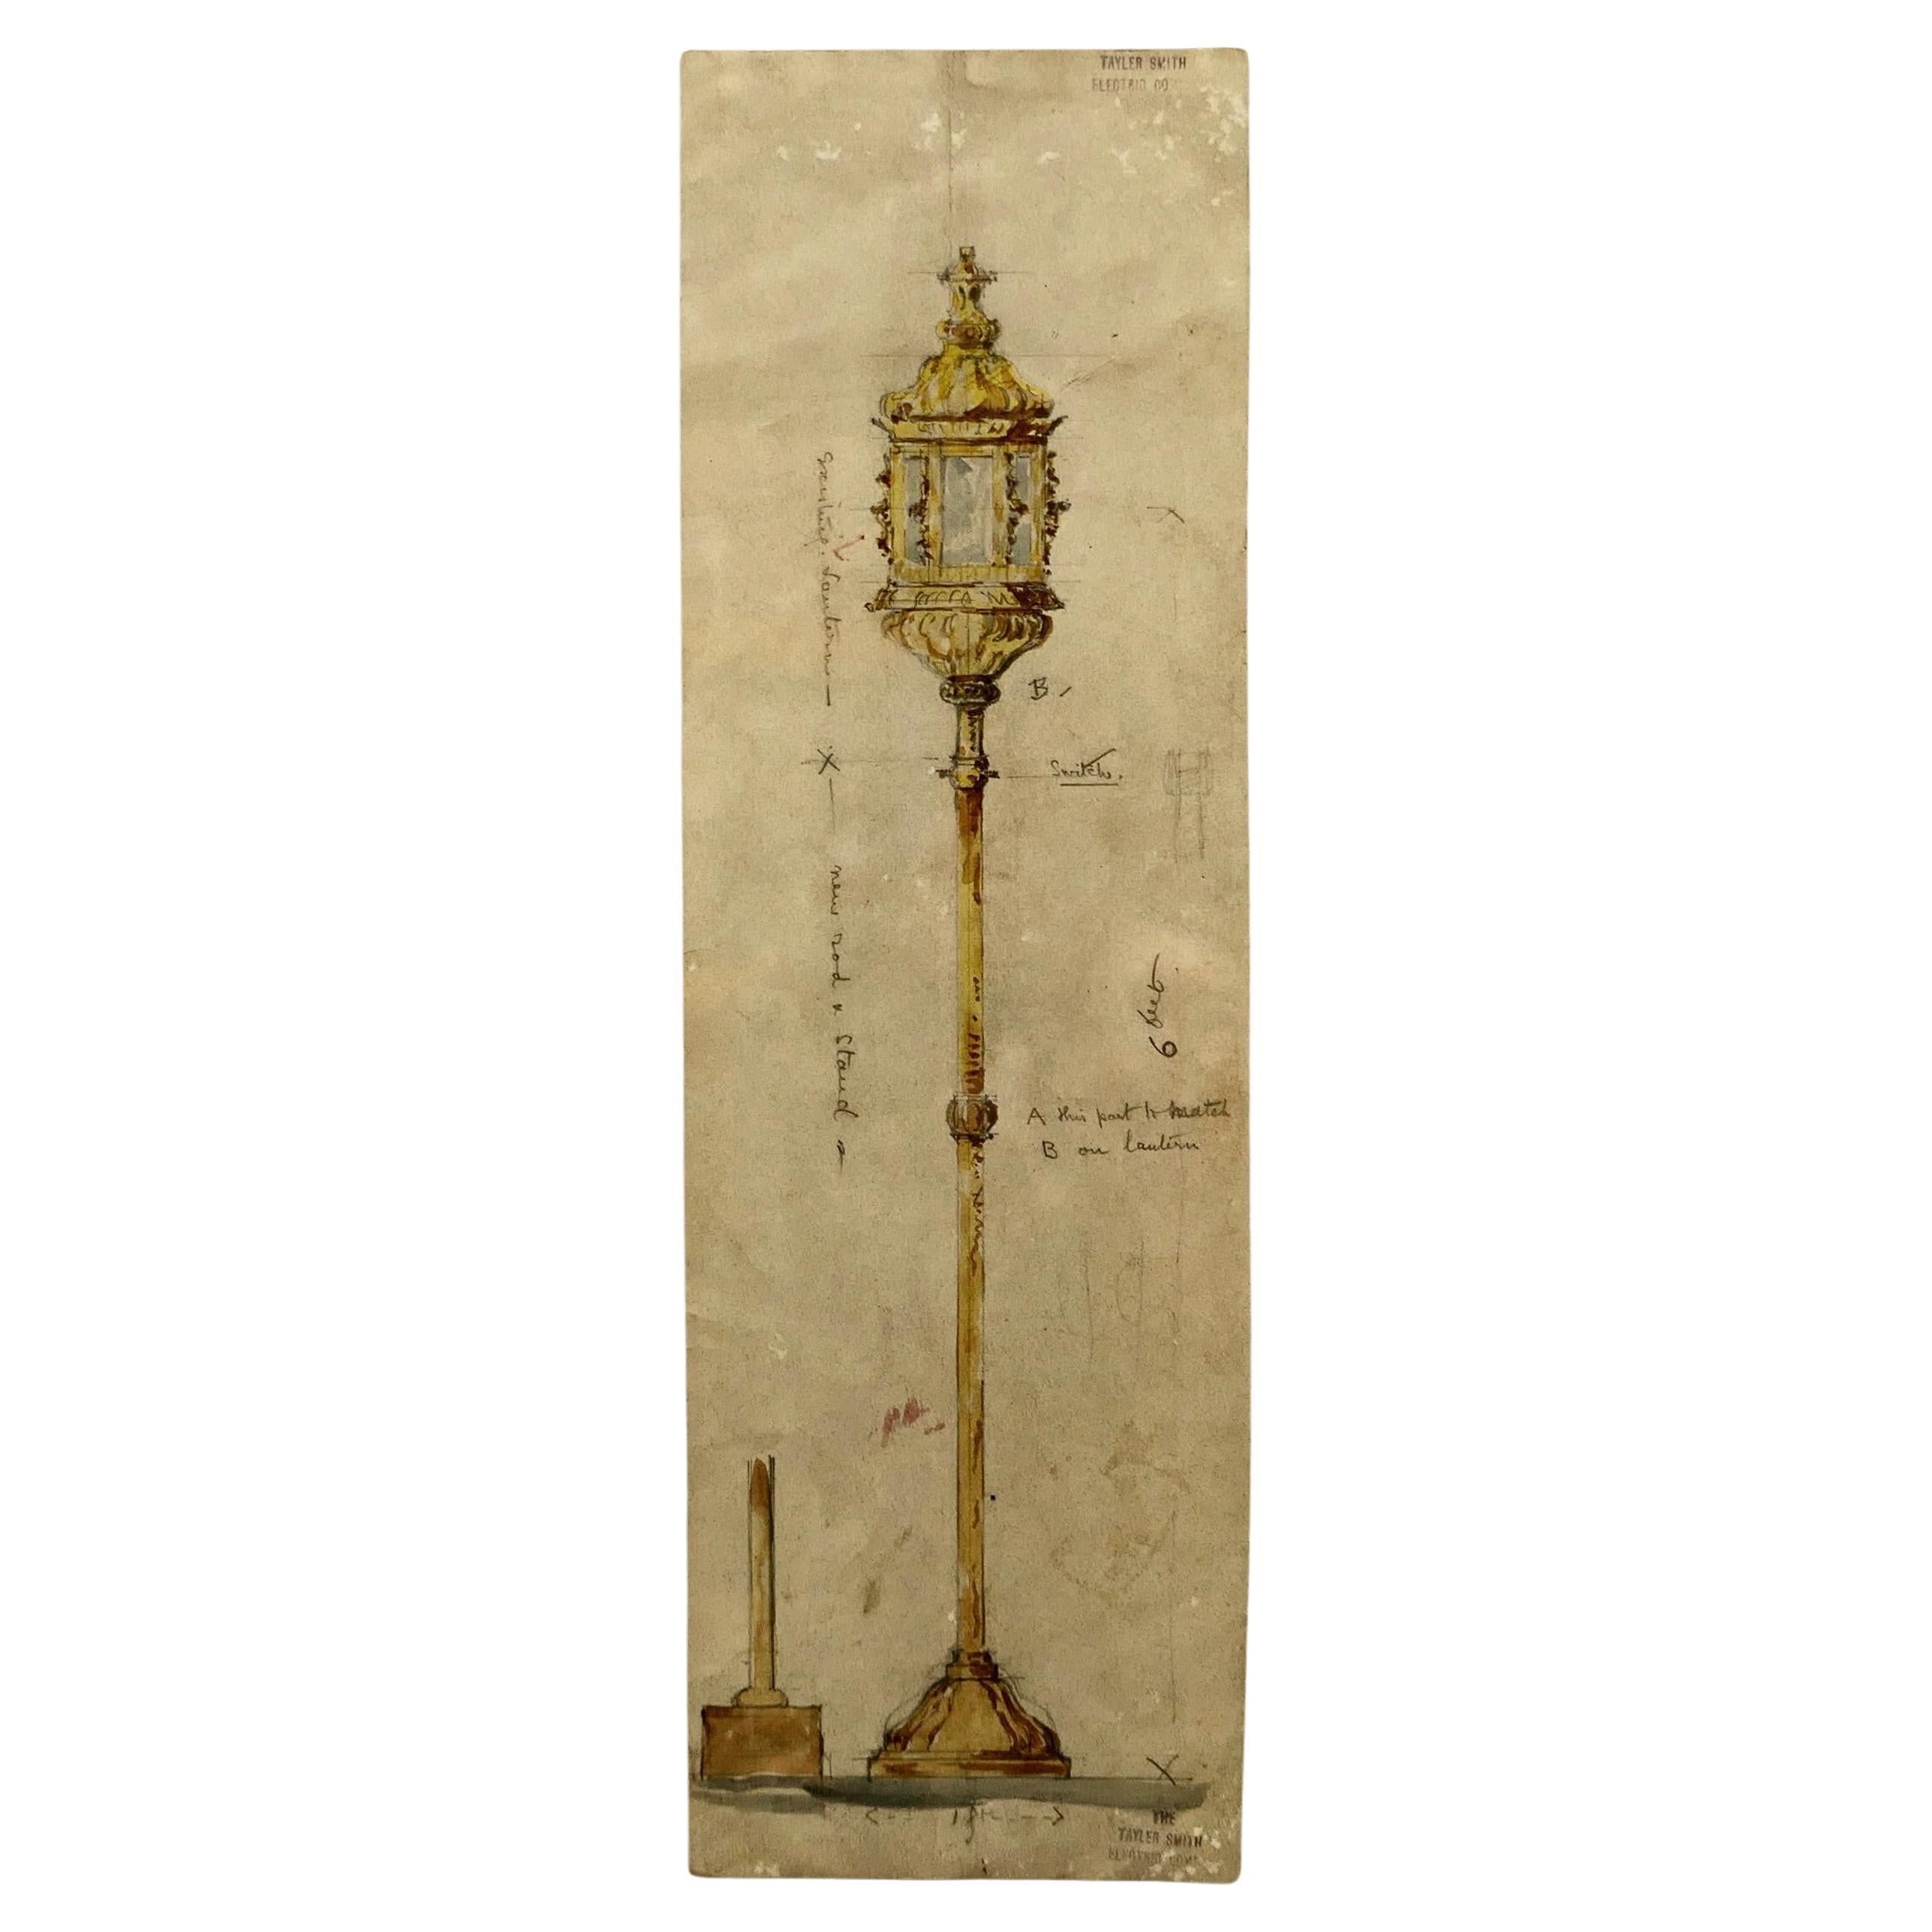 Design for a Street Lantern, Illustration for the Tayler Smith Electric Company